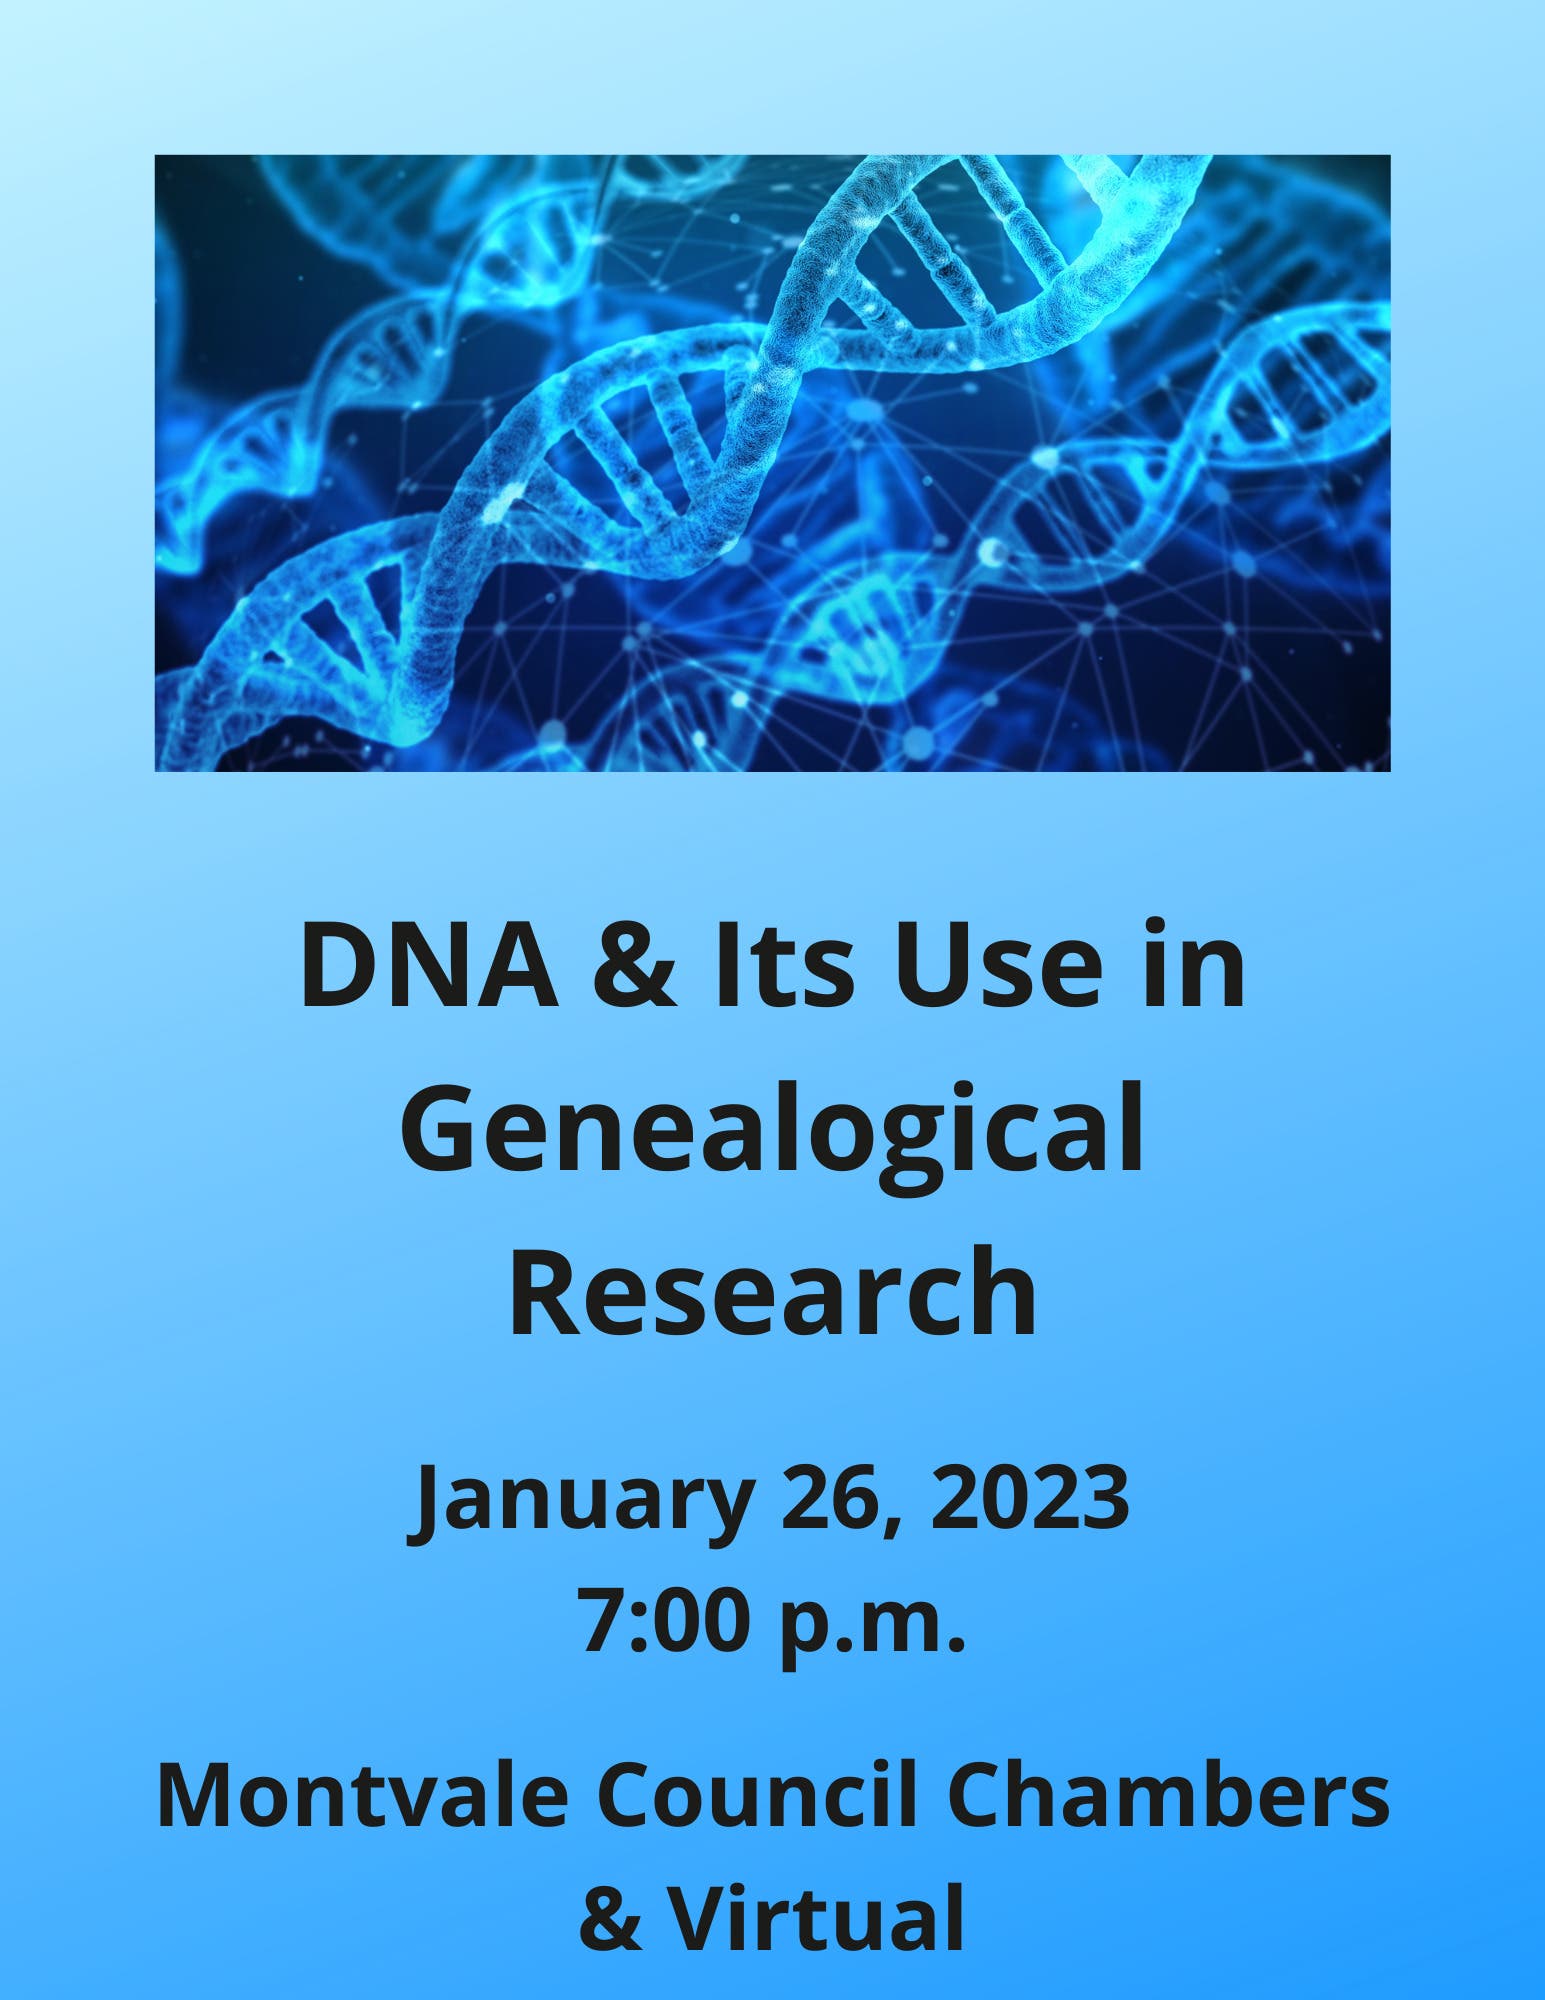 DNA & Its Use in Genealogical Research